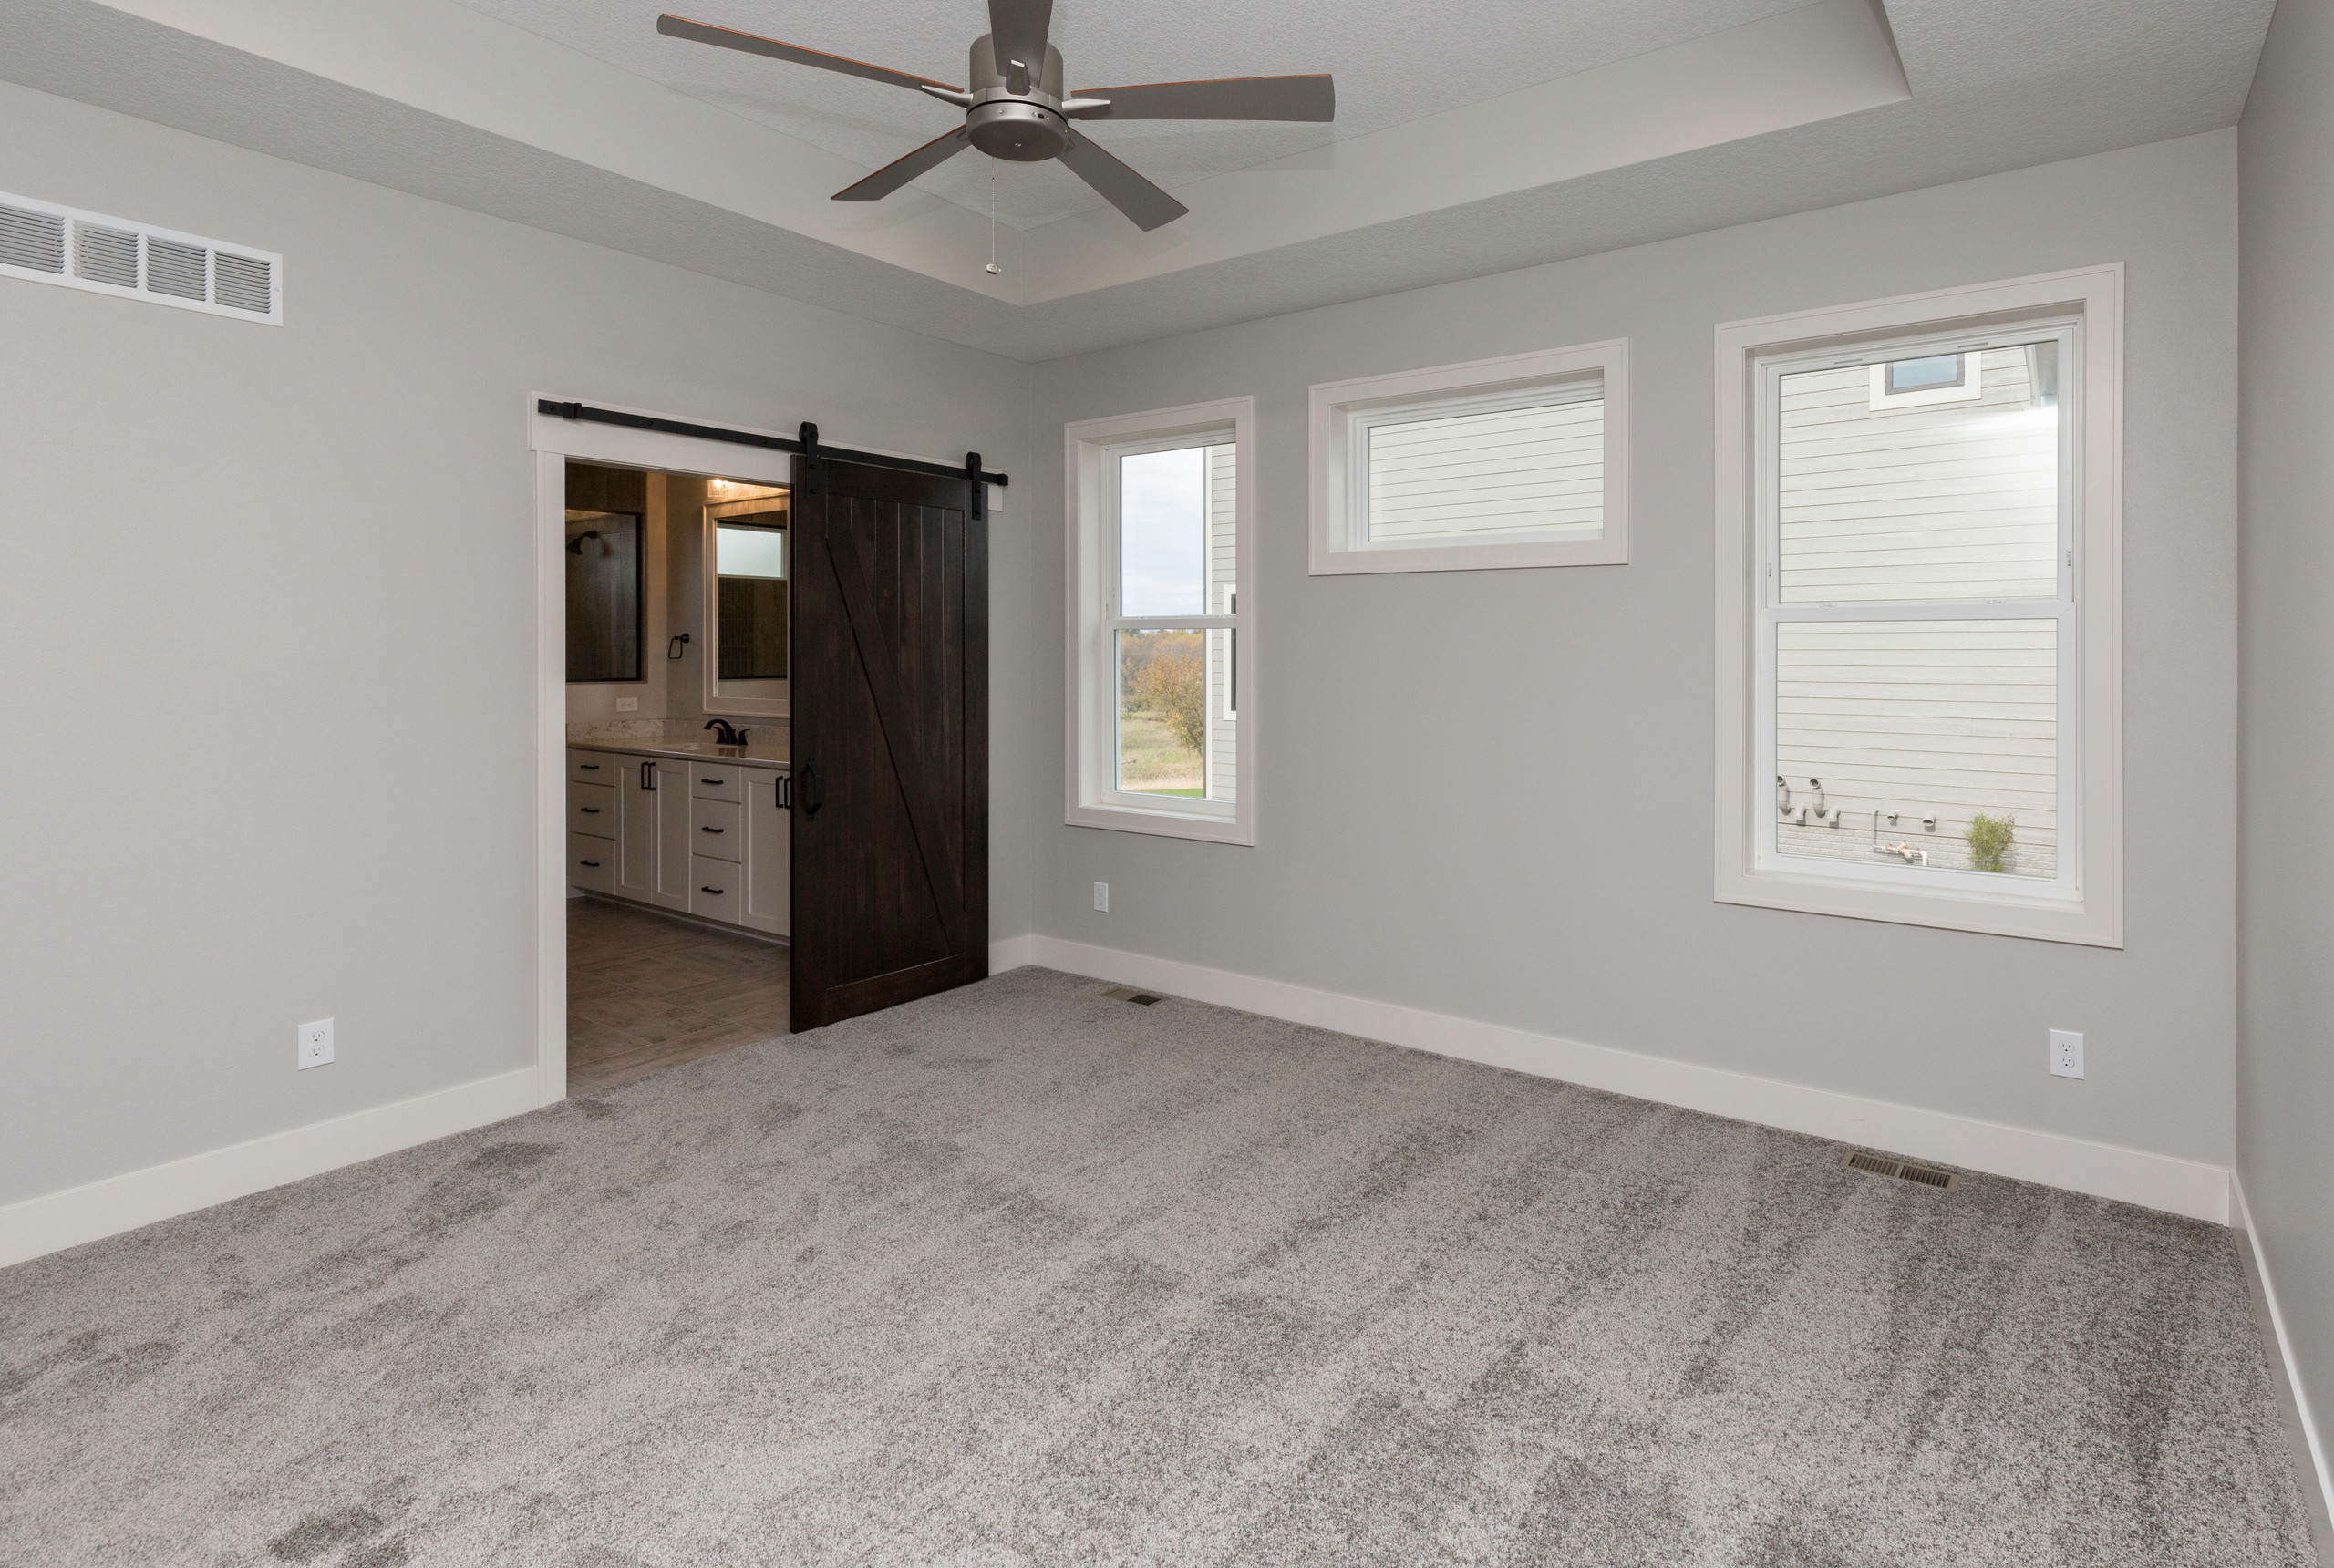 2019 Expanded Edgewater with LL Mother-in-law suite